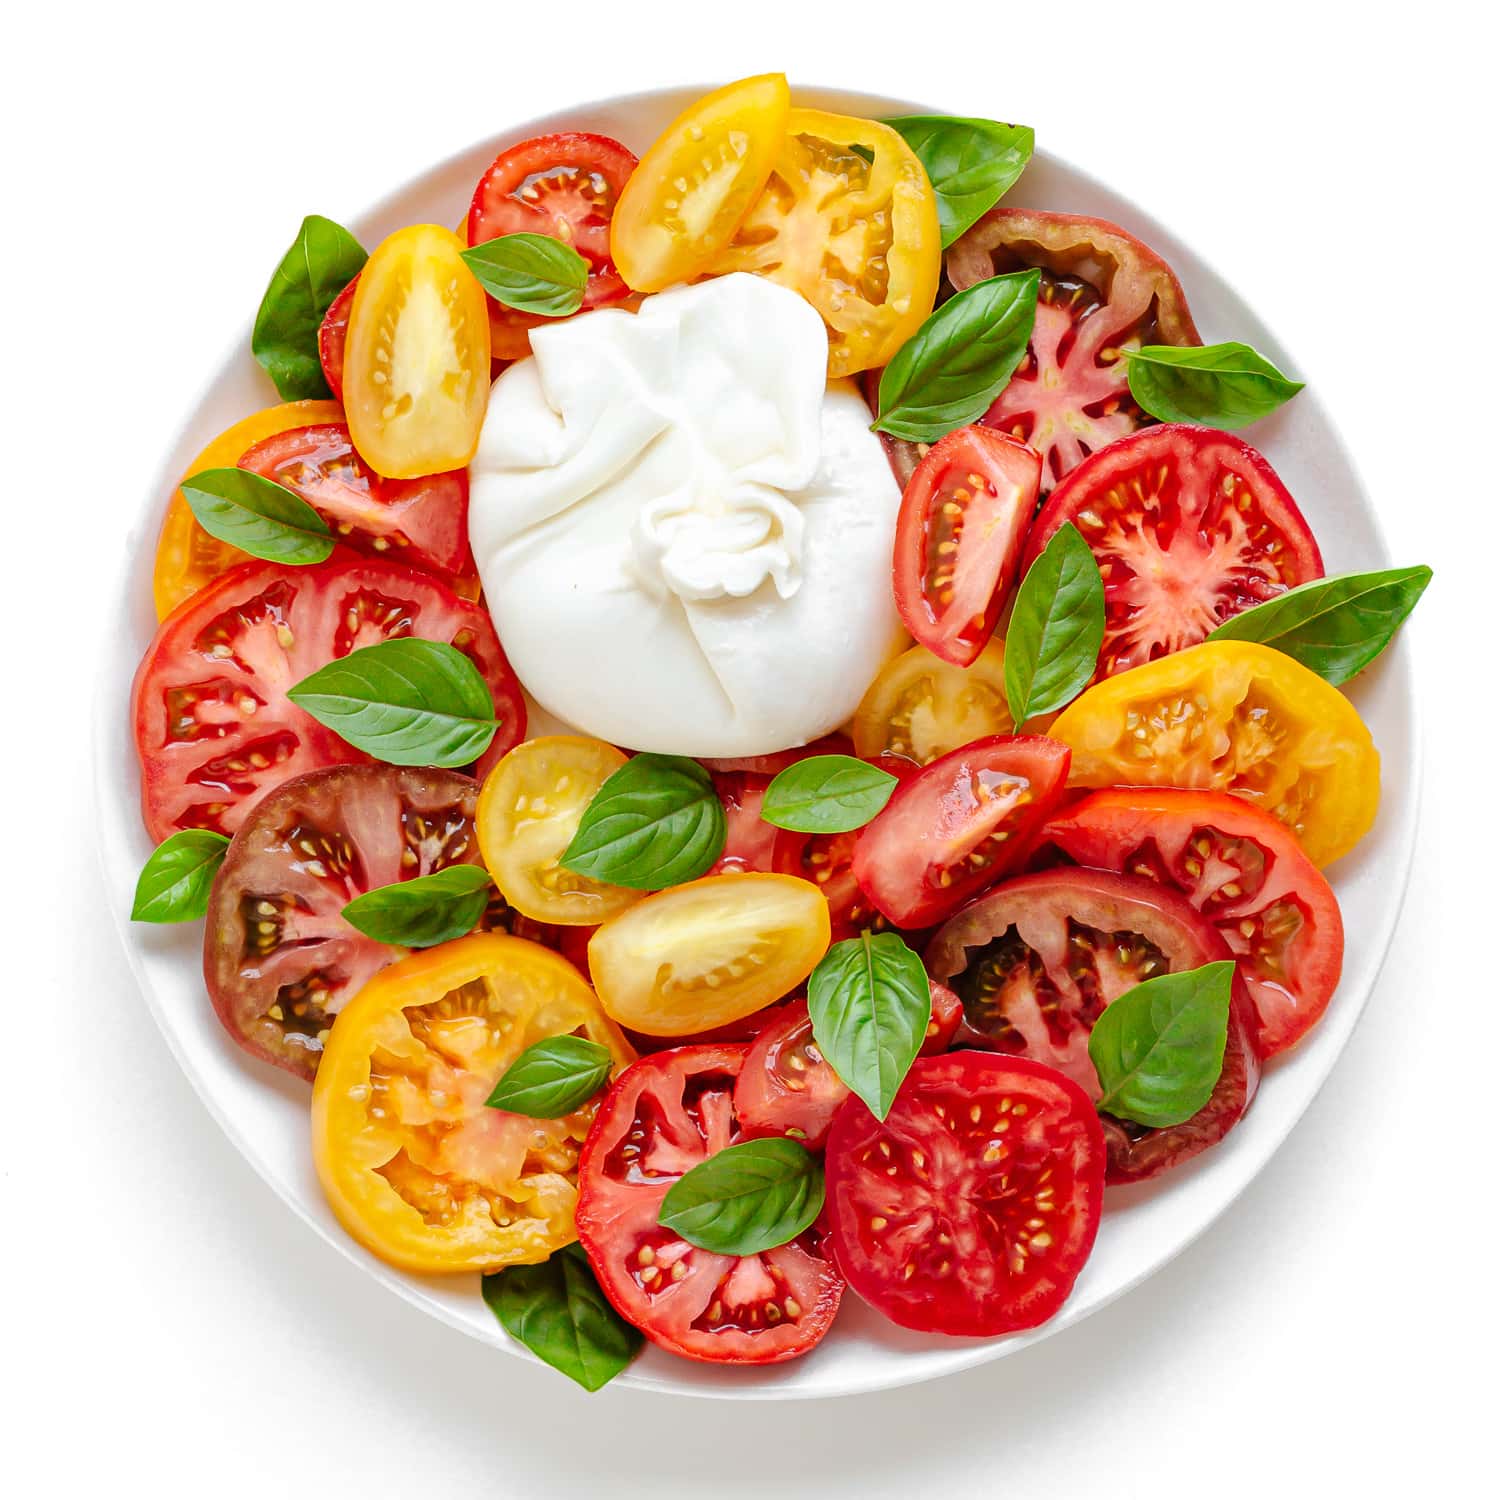 Burrata, sliced heirloom tomatoes and basil assembled on a white plate.